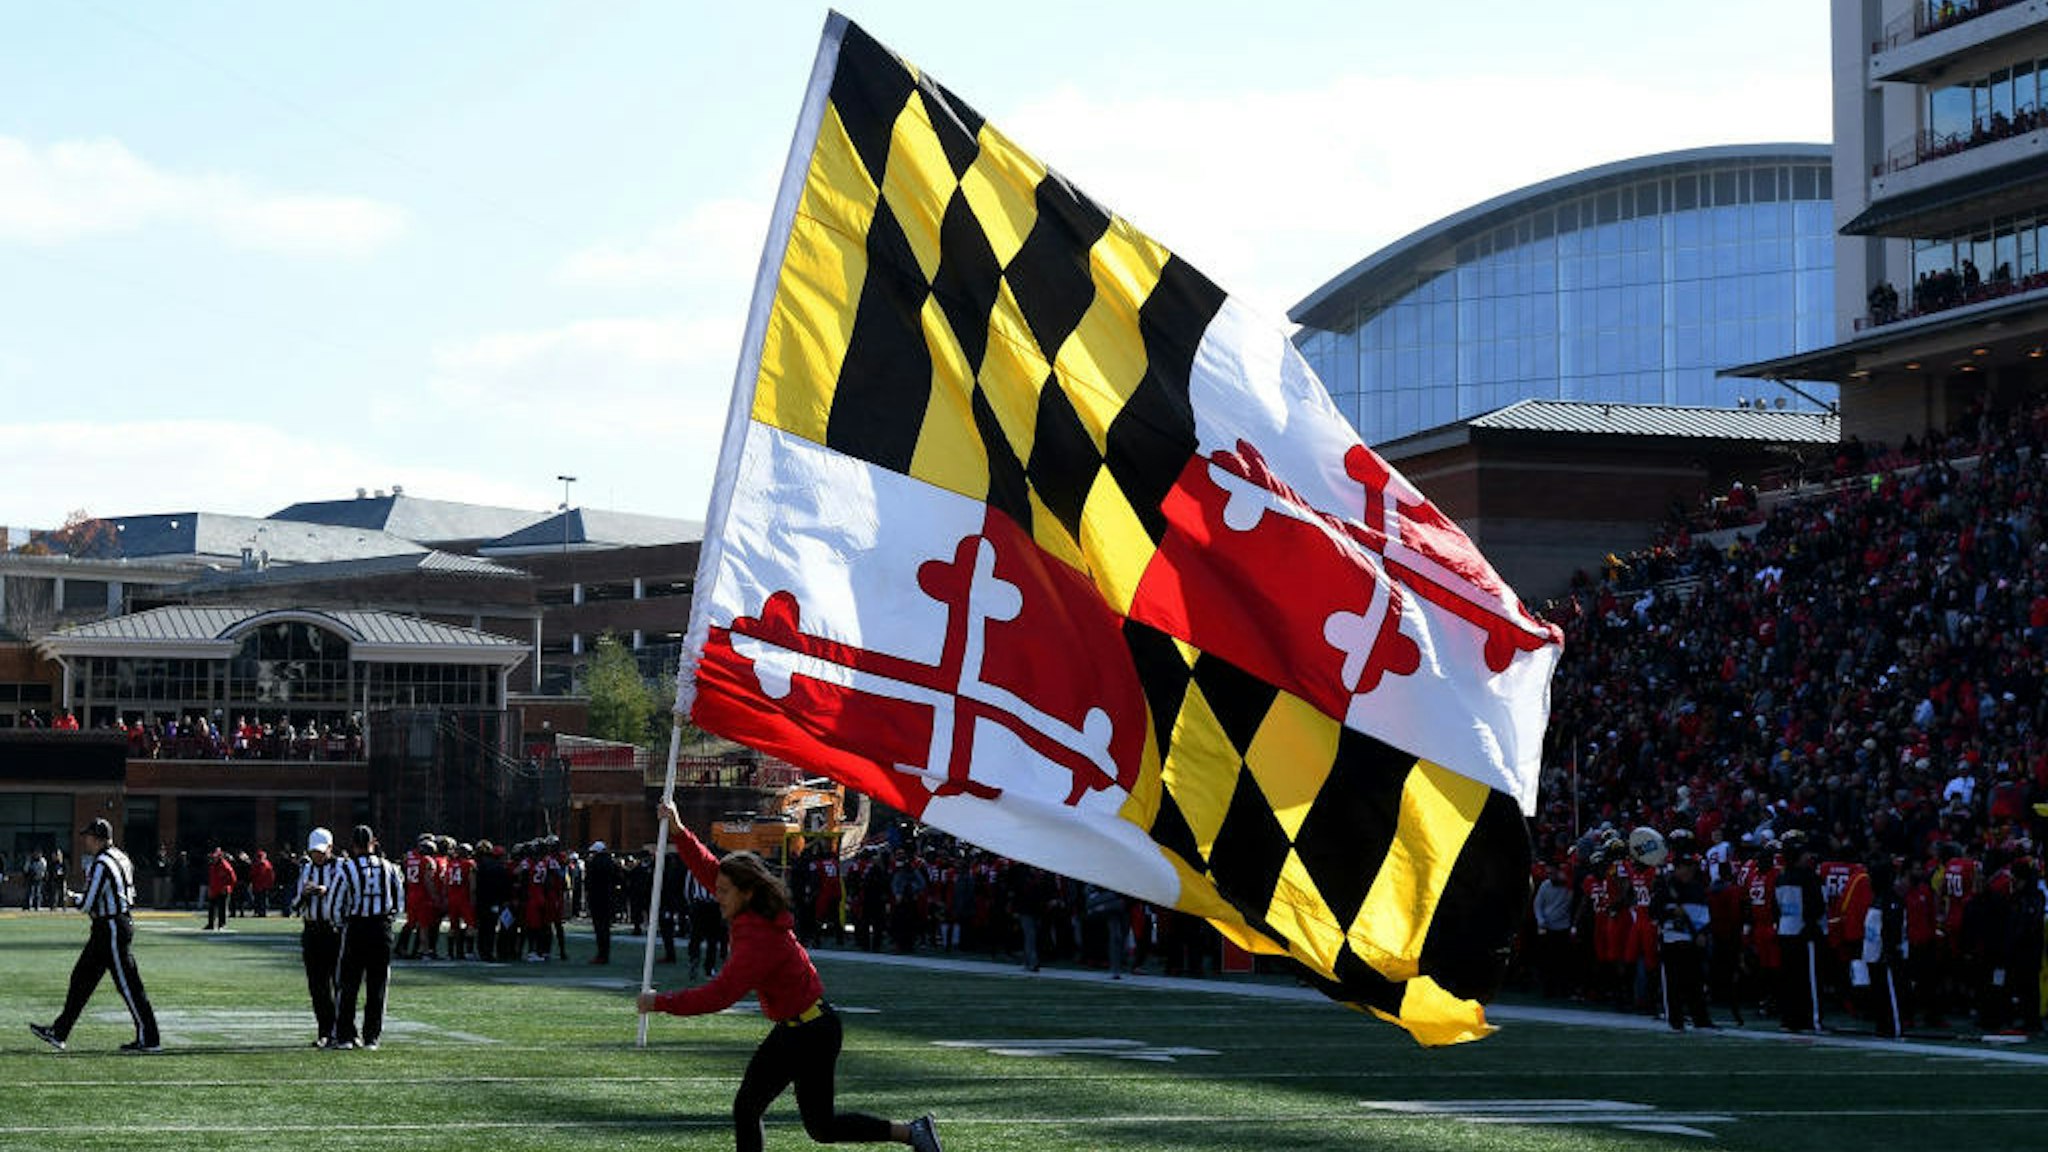 COLLEGE PARK, MD - NOVEMBER 17: The Maryland state flag on display during the game between the Ohio State Buckeyes and the Maryland Terrapins at Maryland Stadium on November 17, 2018 in College Park, Maryland. (Photo by G Fiume/Maryland Terrapins/Getty Images)